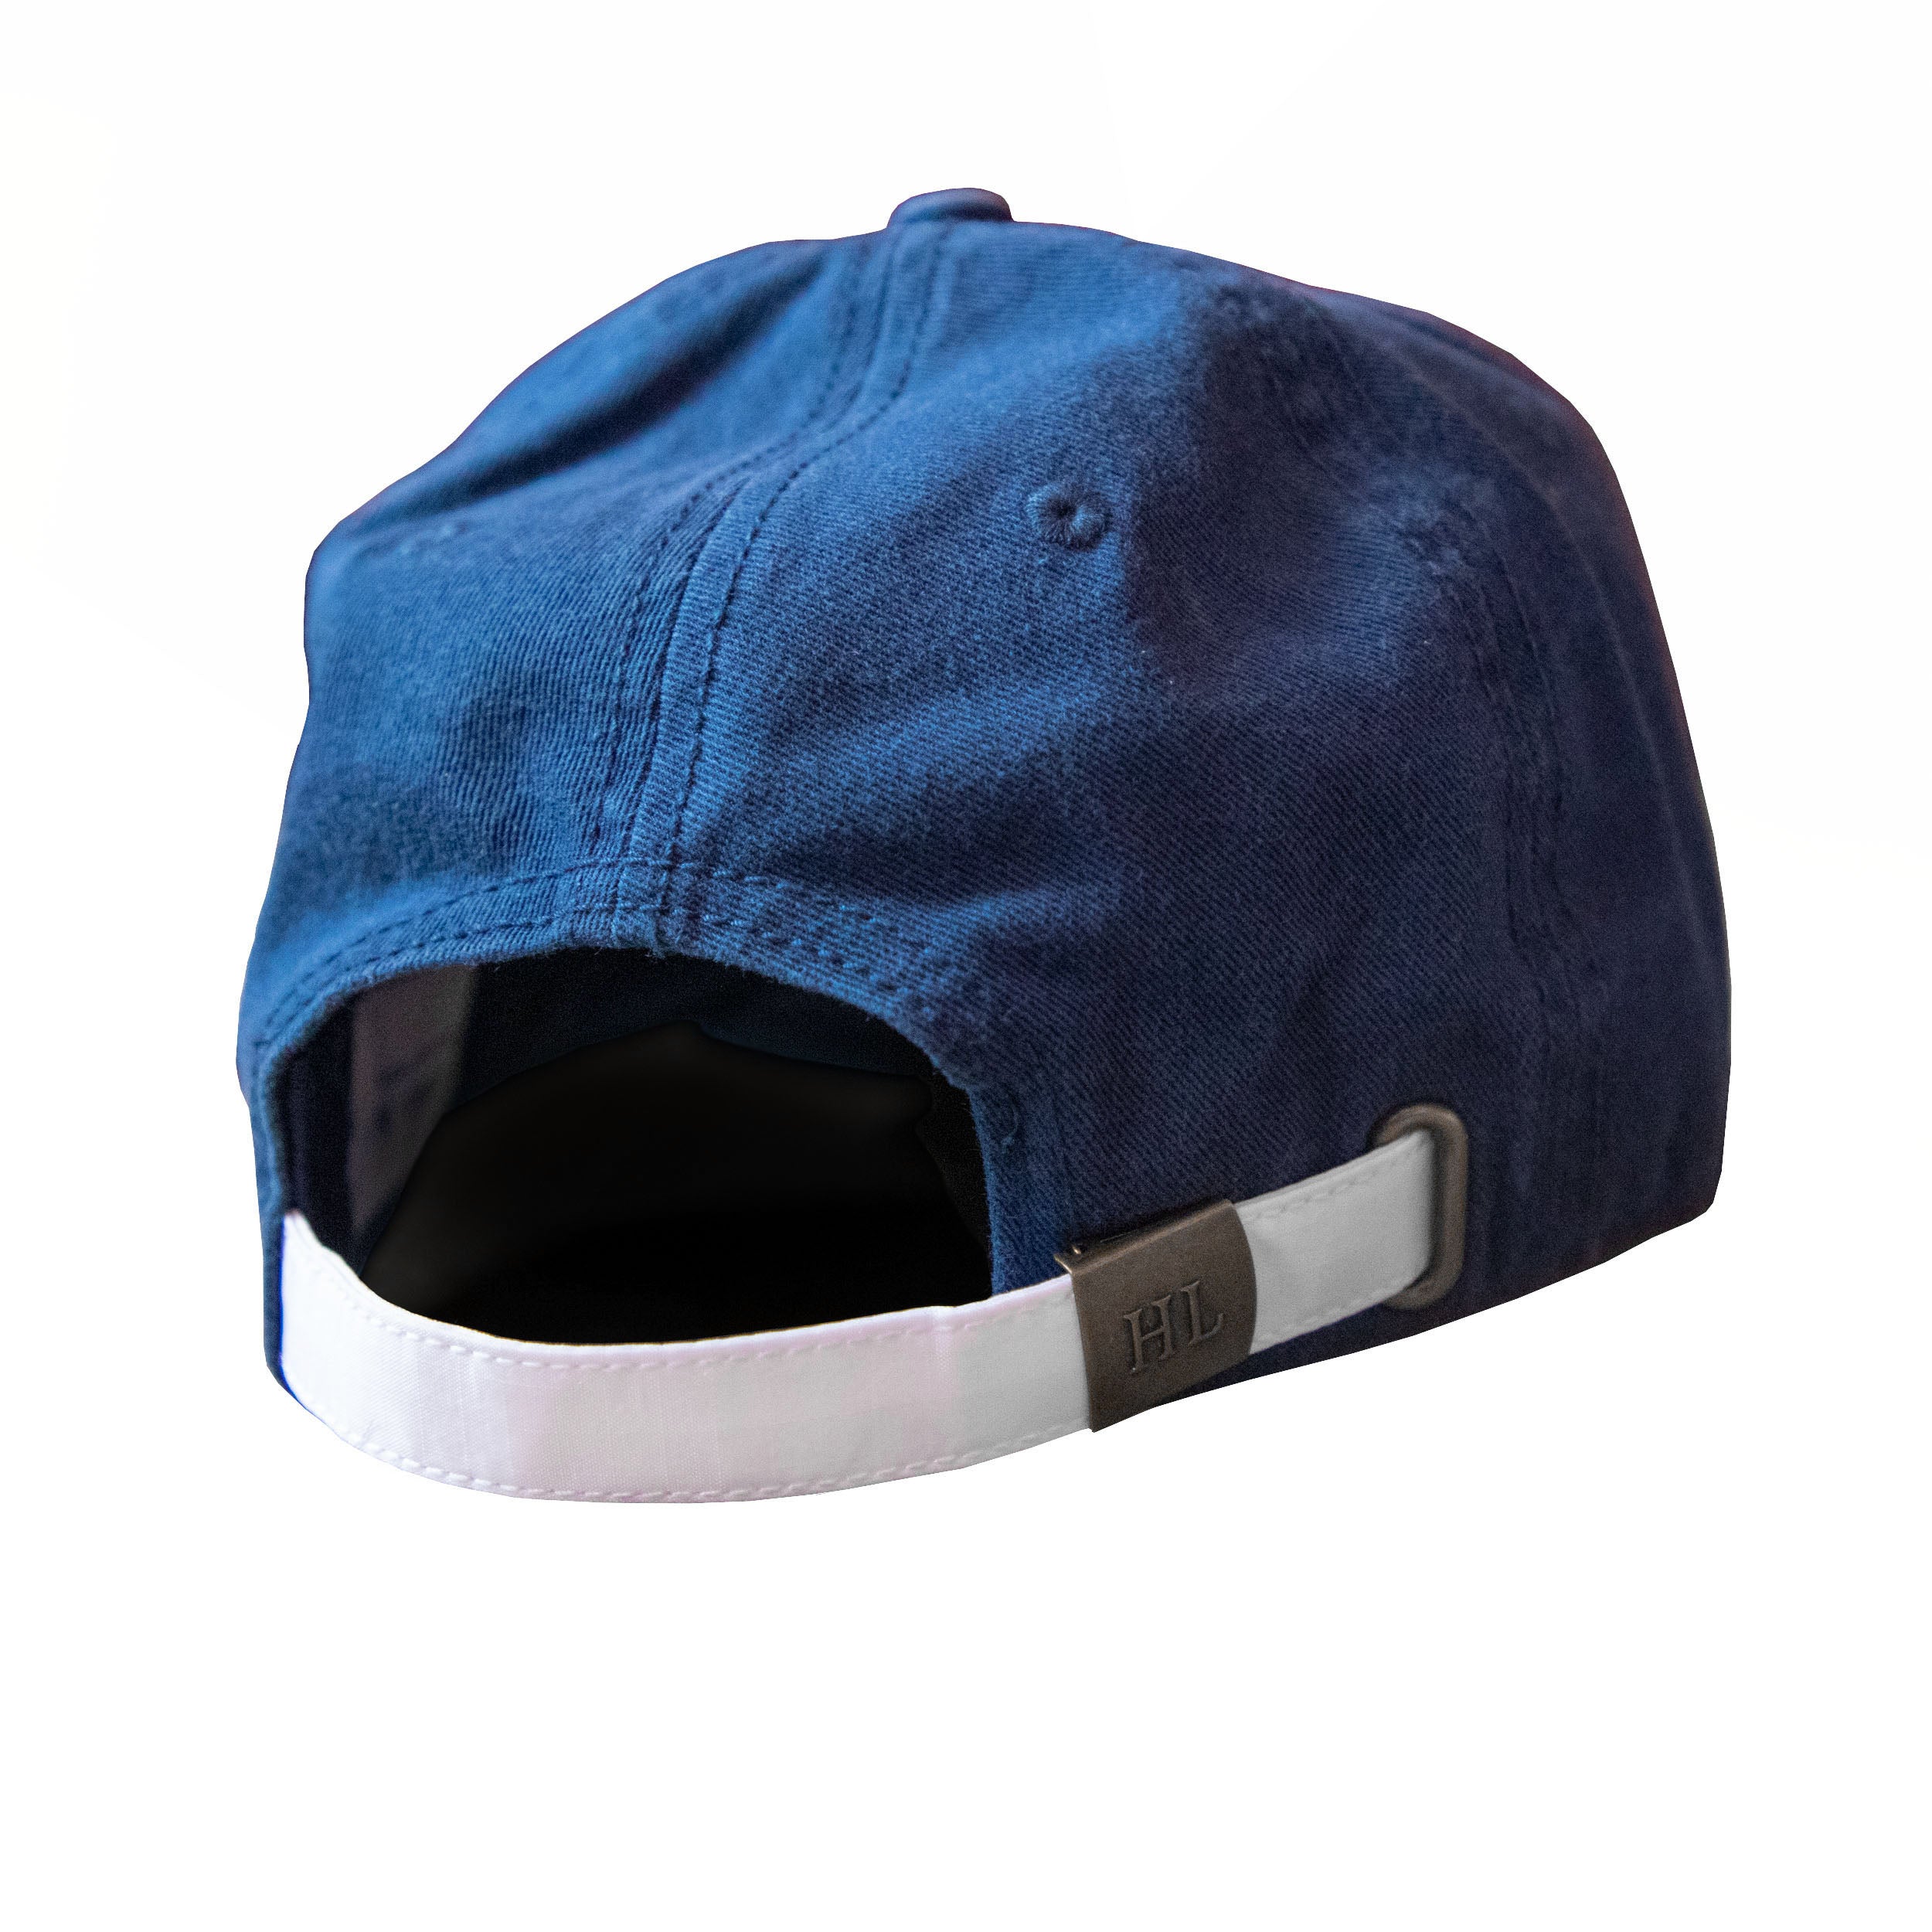 Blade and Bow 5 Key Navy Hat